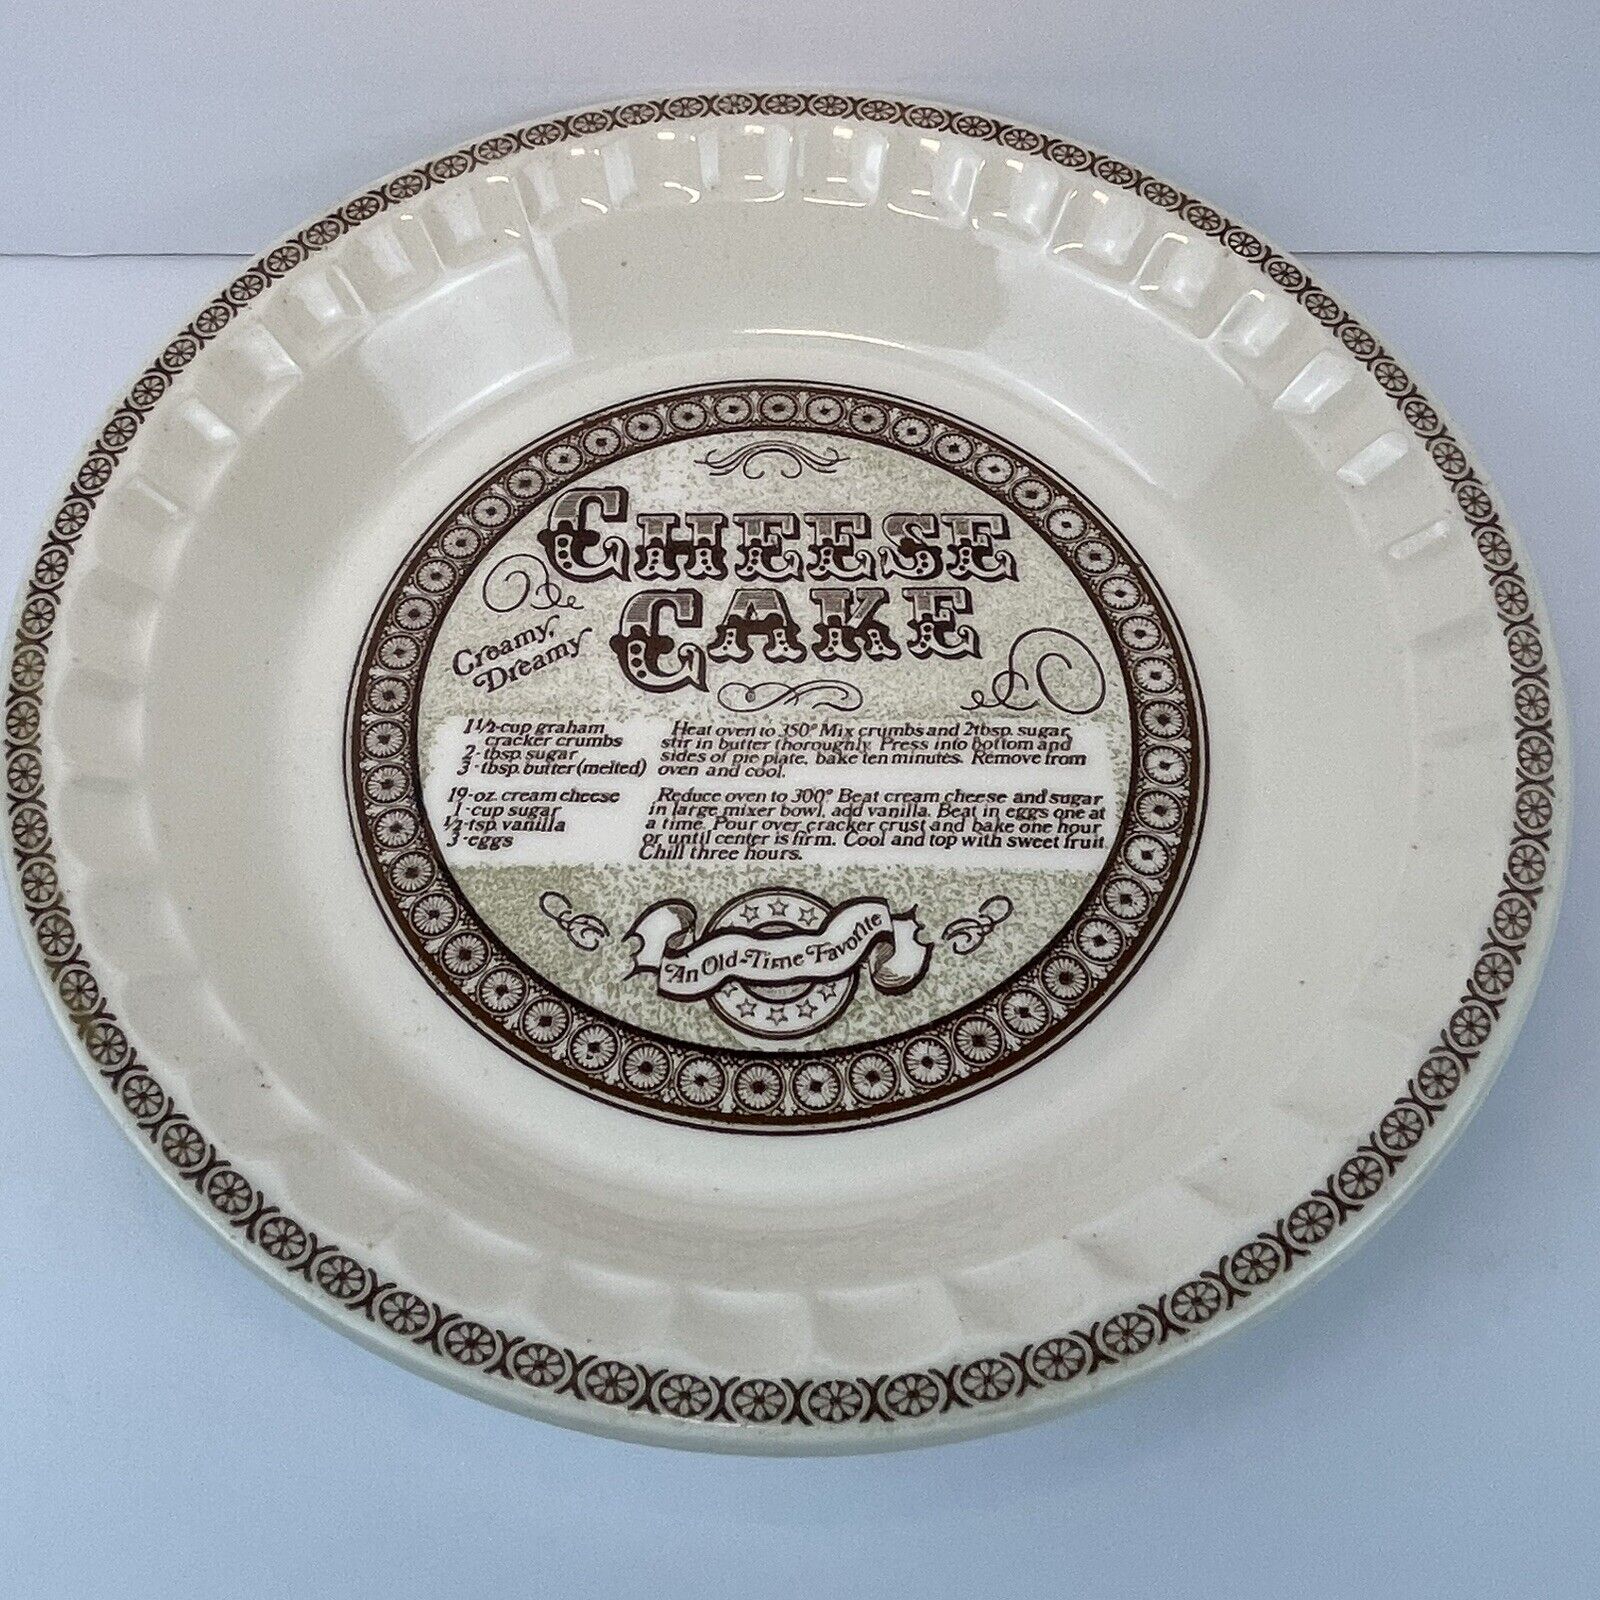 Vintage 1983 Cheesecake Pie Plate with Recipe by Jeannette Royal China 11 inches